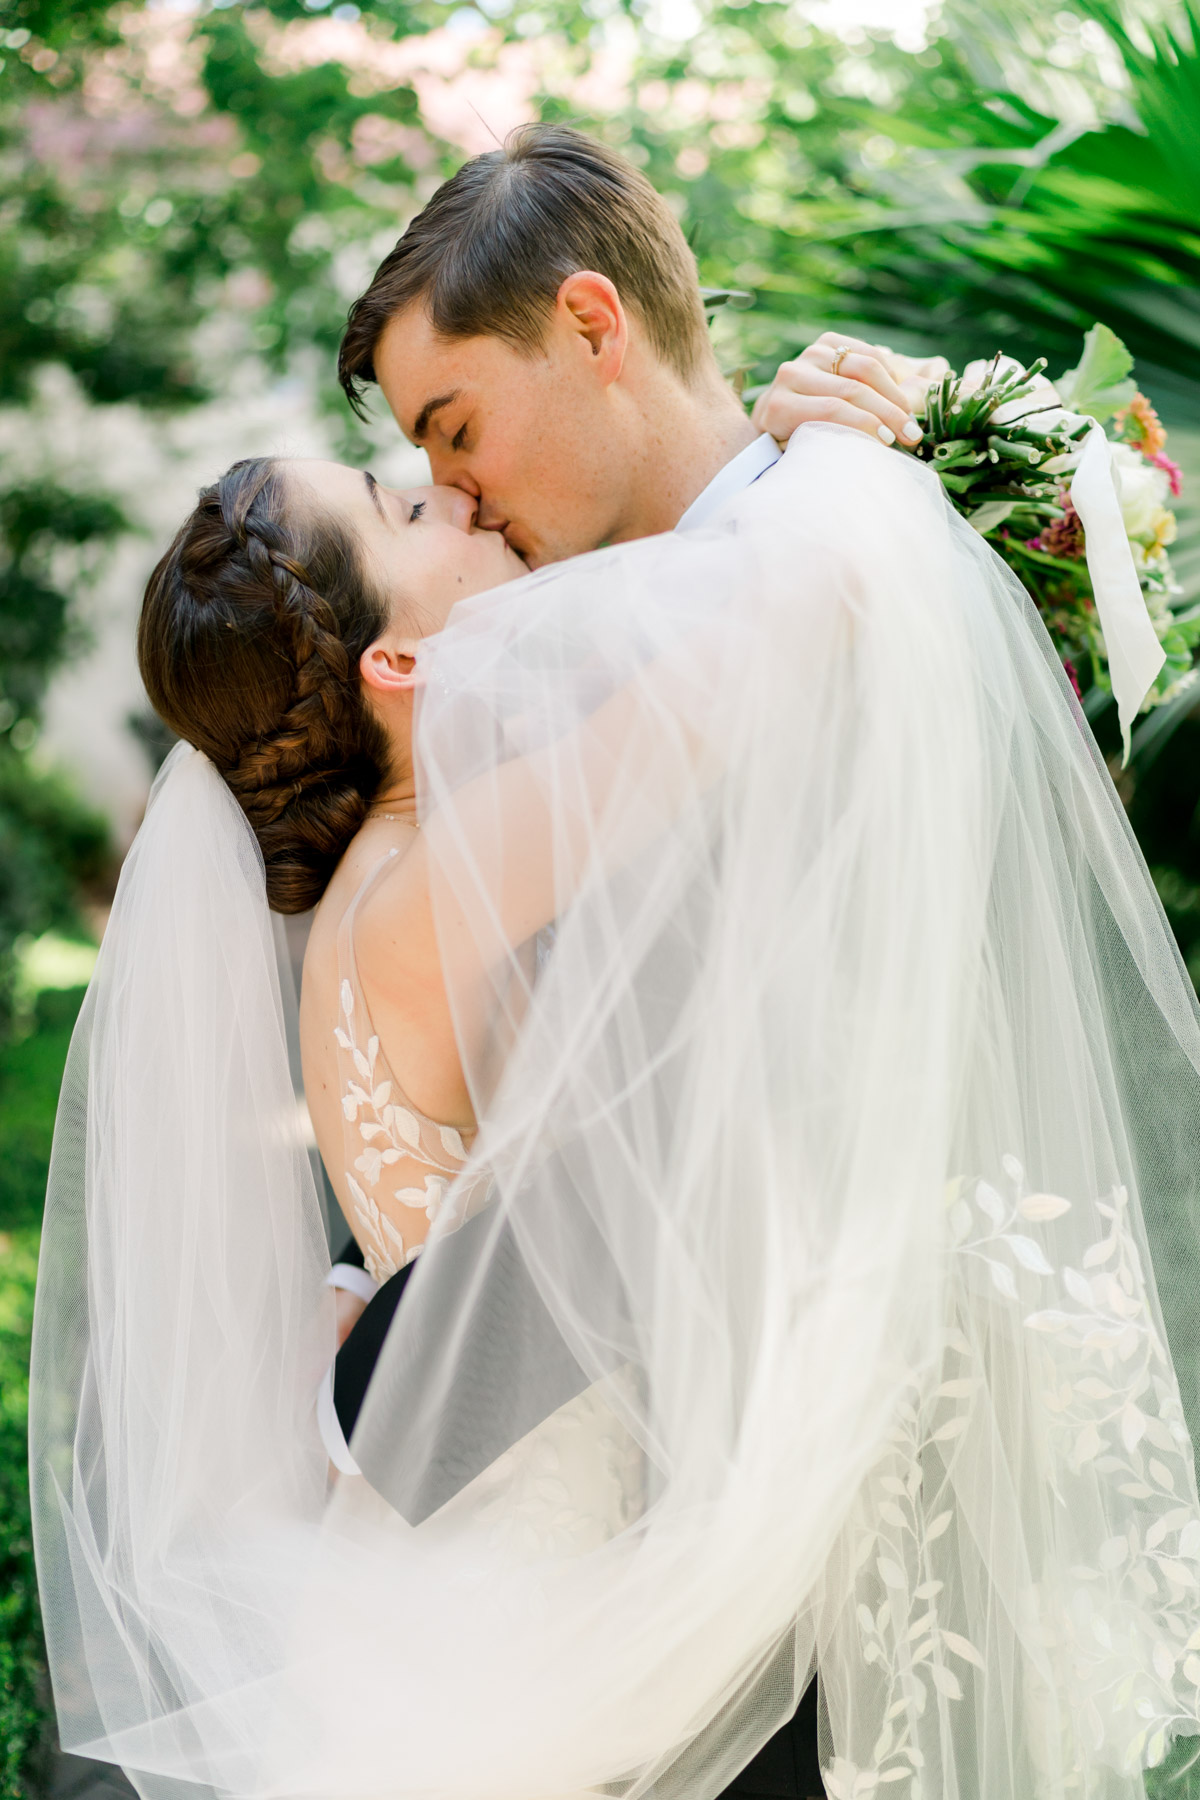 A bride and groom kiss, wrapped in the bride's veil